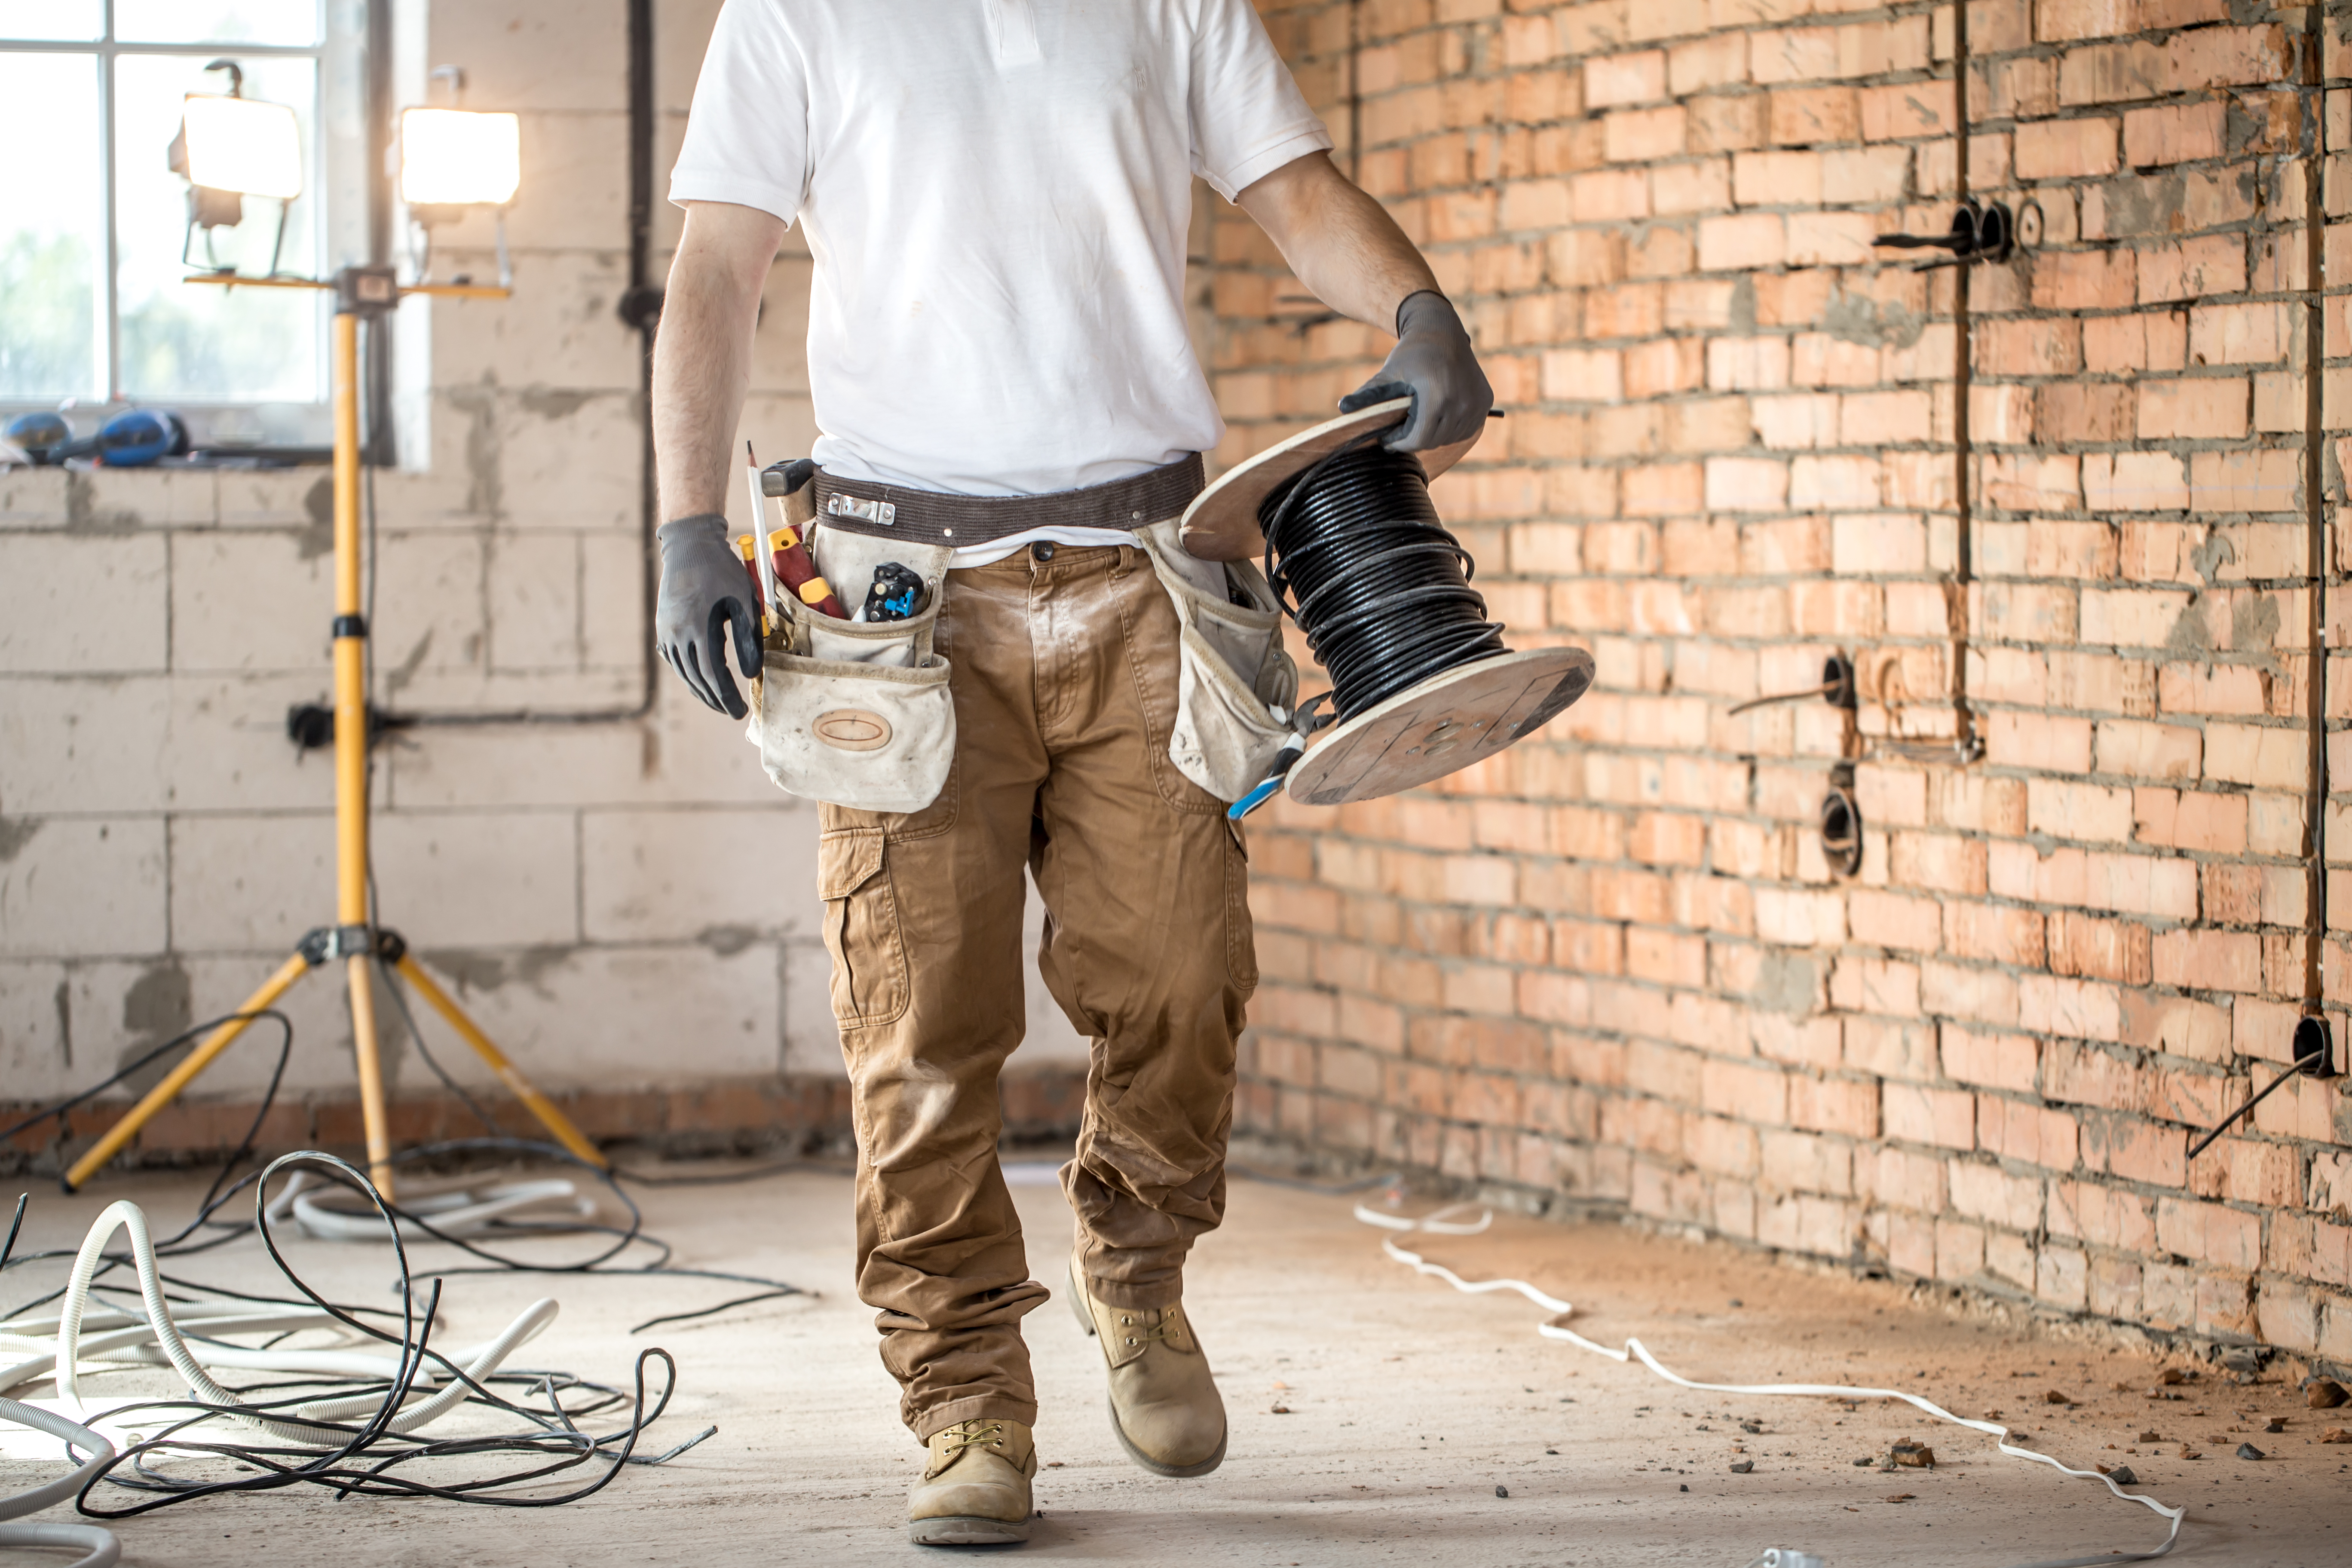 A Top-Rated Electrician in Hamilton, dressed in a white shirt, brown construction trousers, a full tool belt and work boots, can be seen carrying a wood spool of black wire across a brick and block room that is obviously part of a construction project.